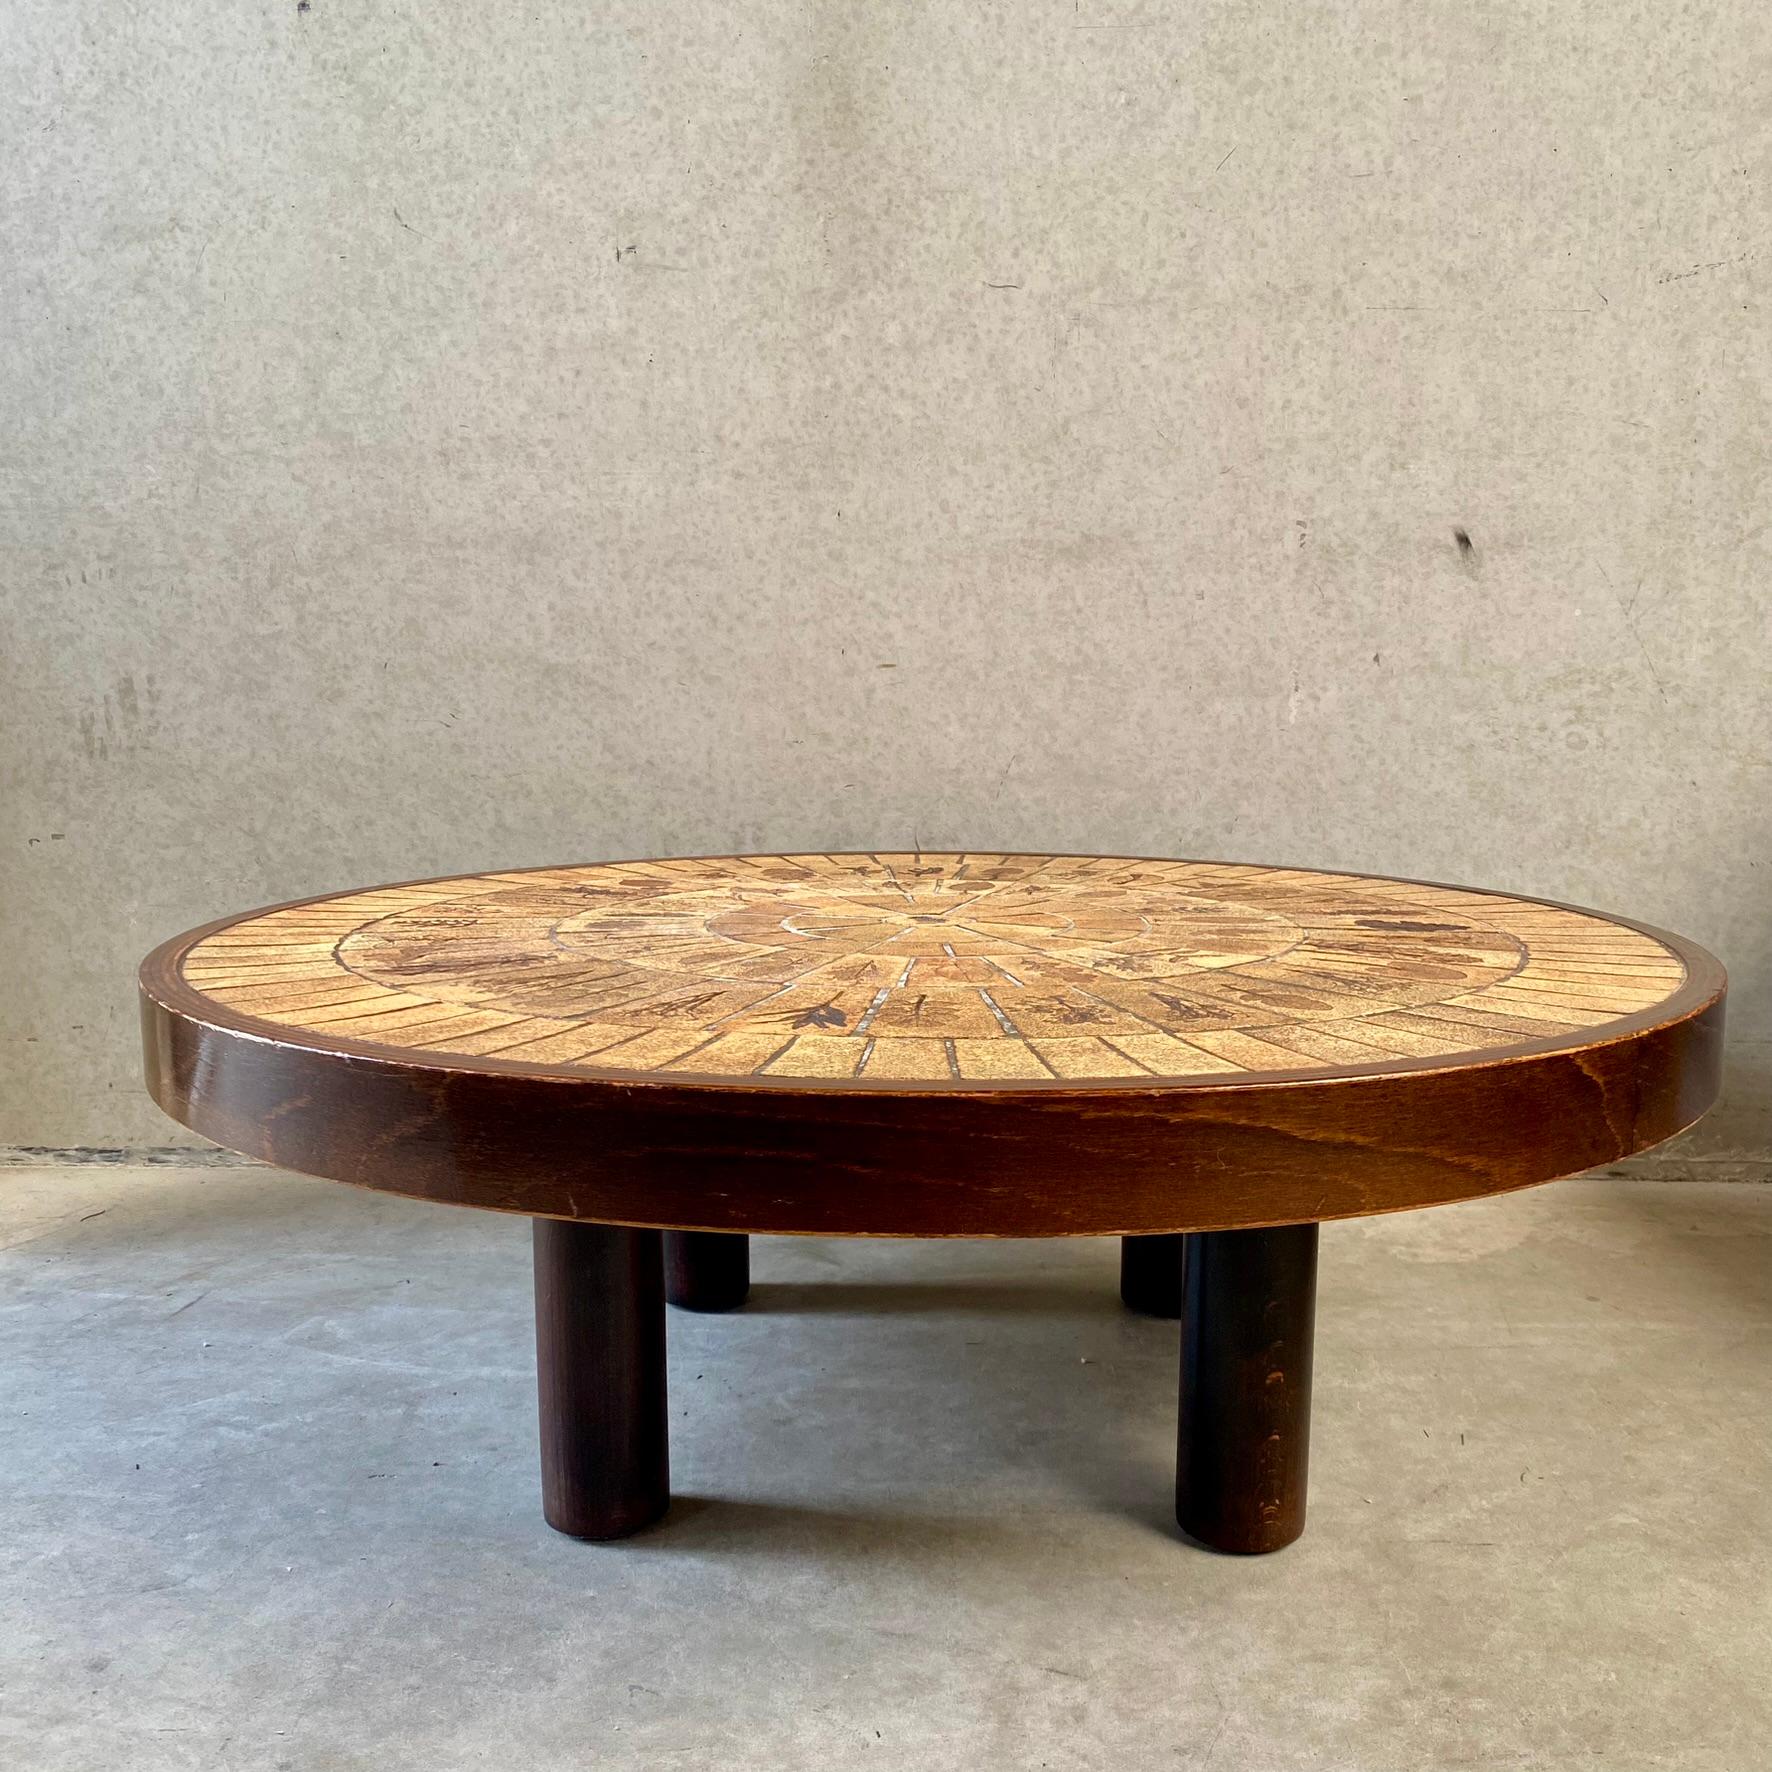 Round Brutalist Ceramic Coffee Table by Roger Capron, France 1960 For Sale 6